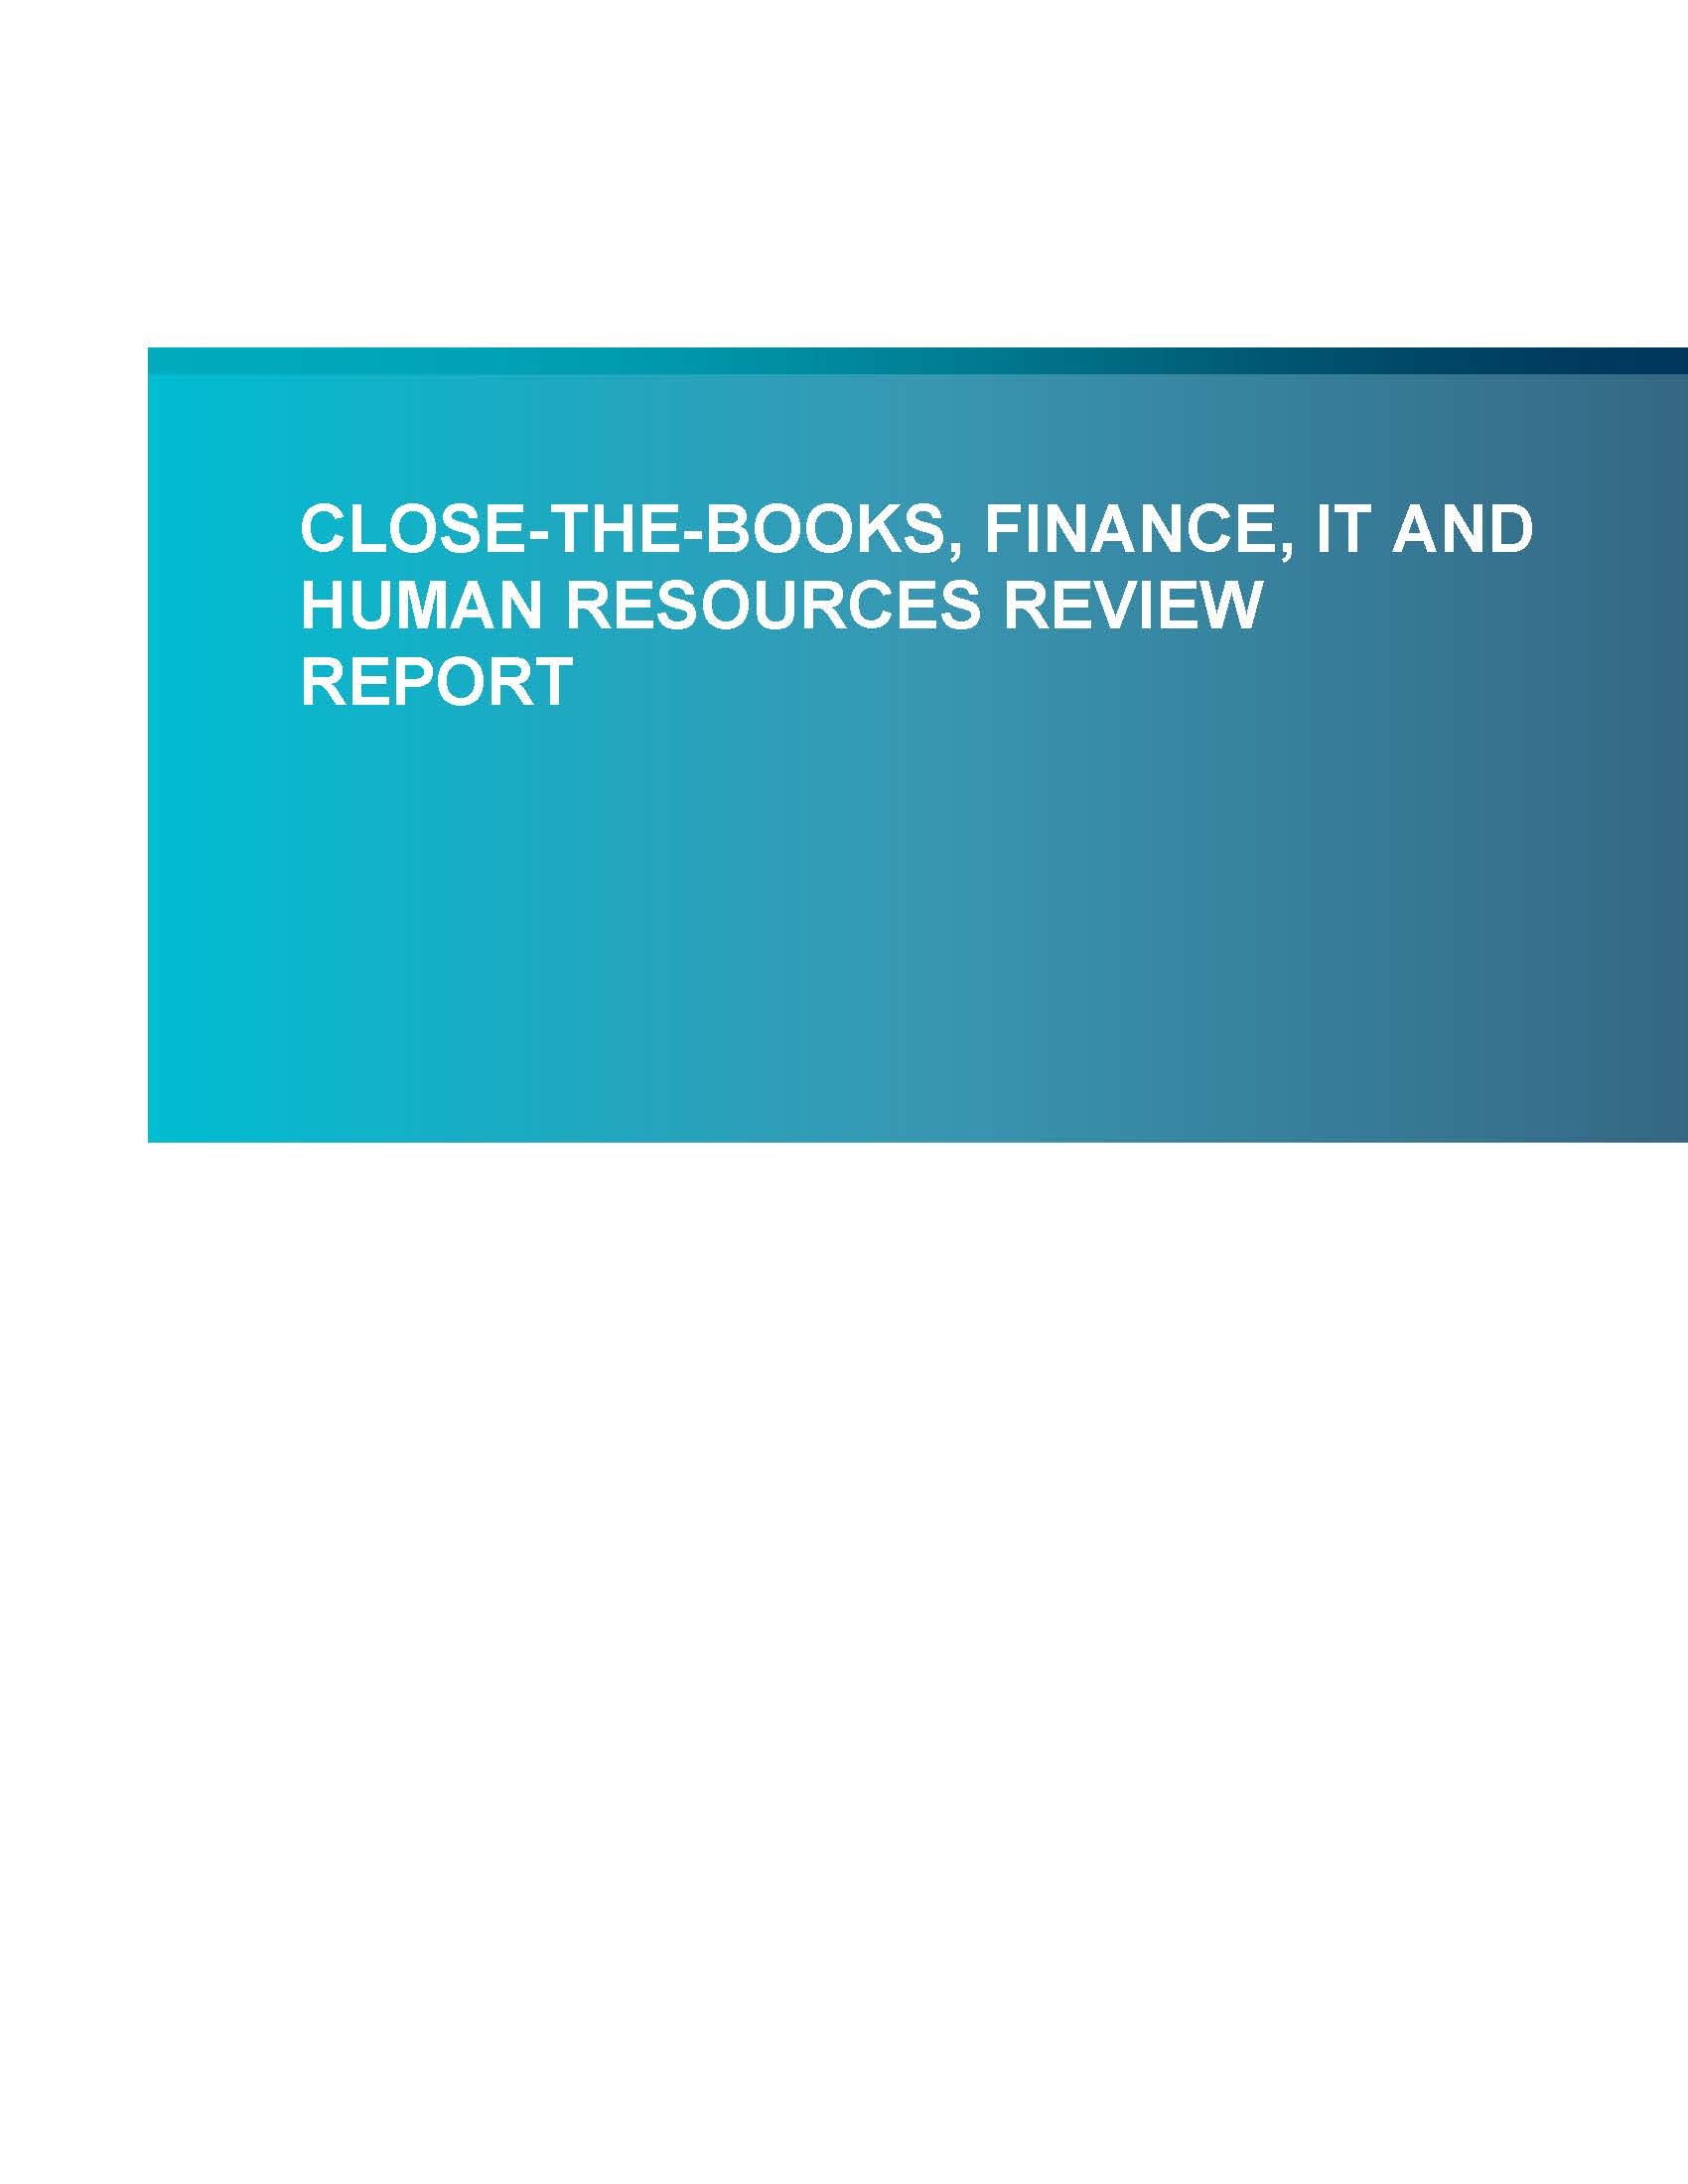 Screenshot of the first page of Close-the-Books, Finance, IT and Human Resources Review Report